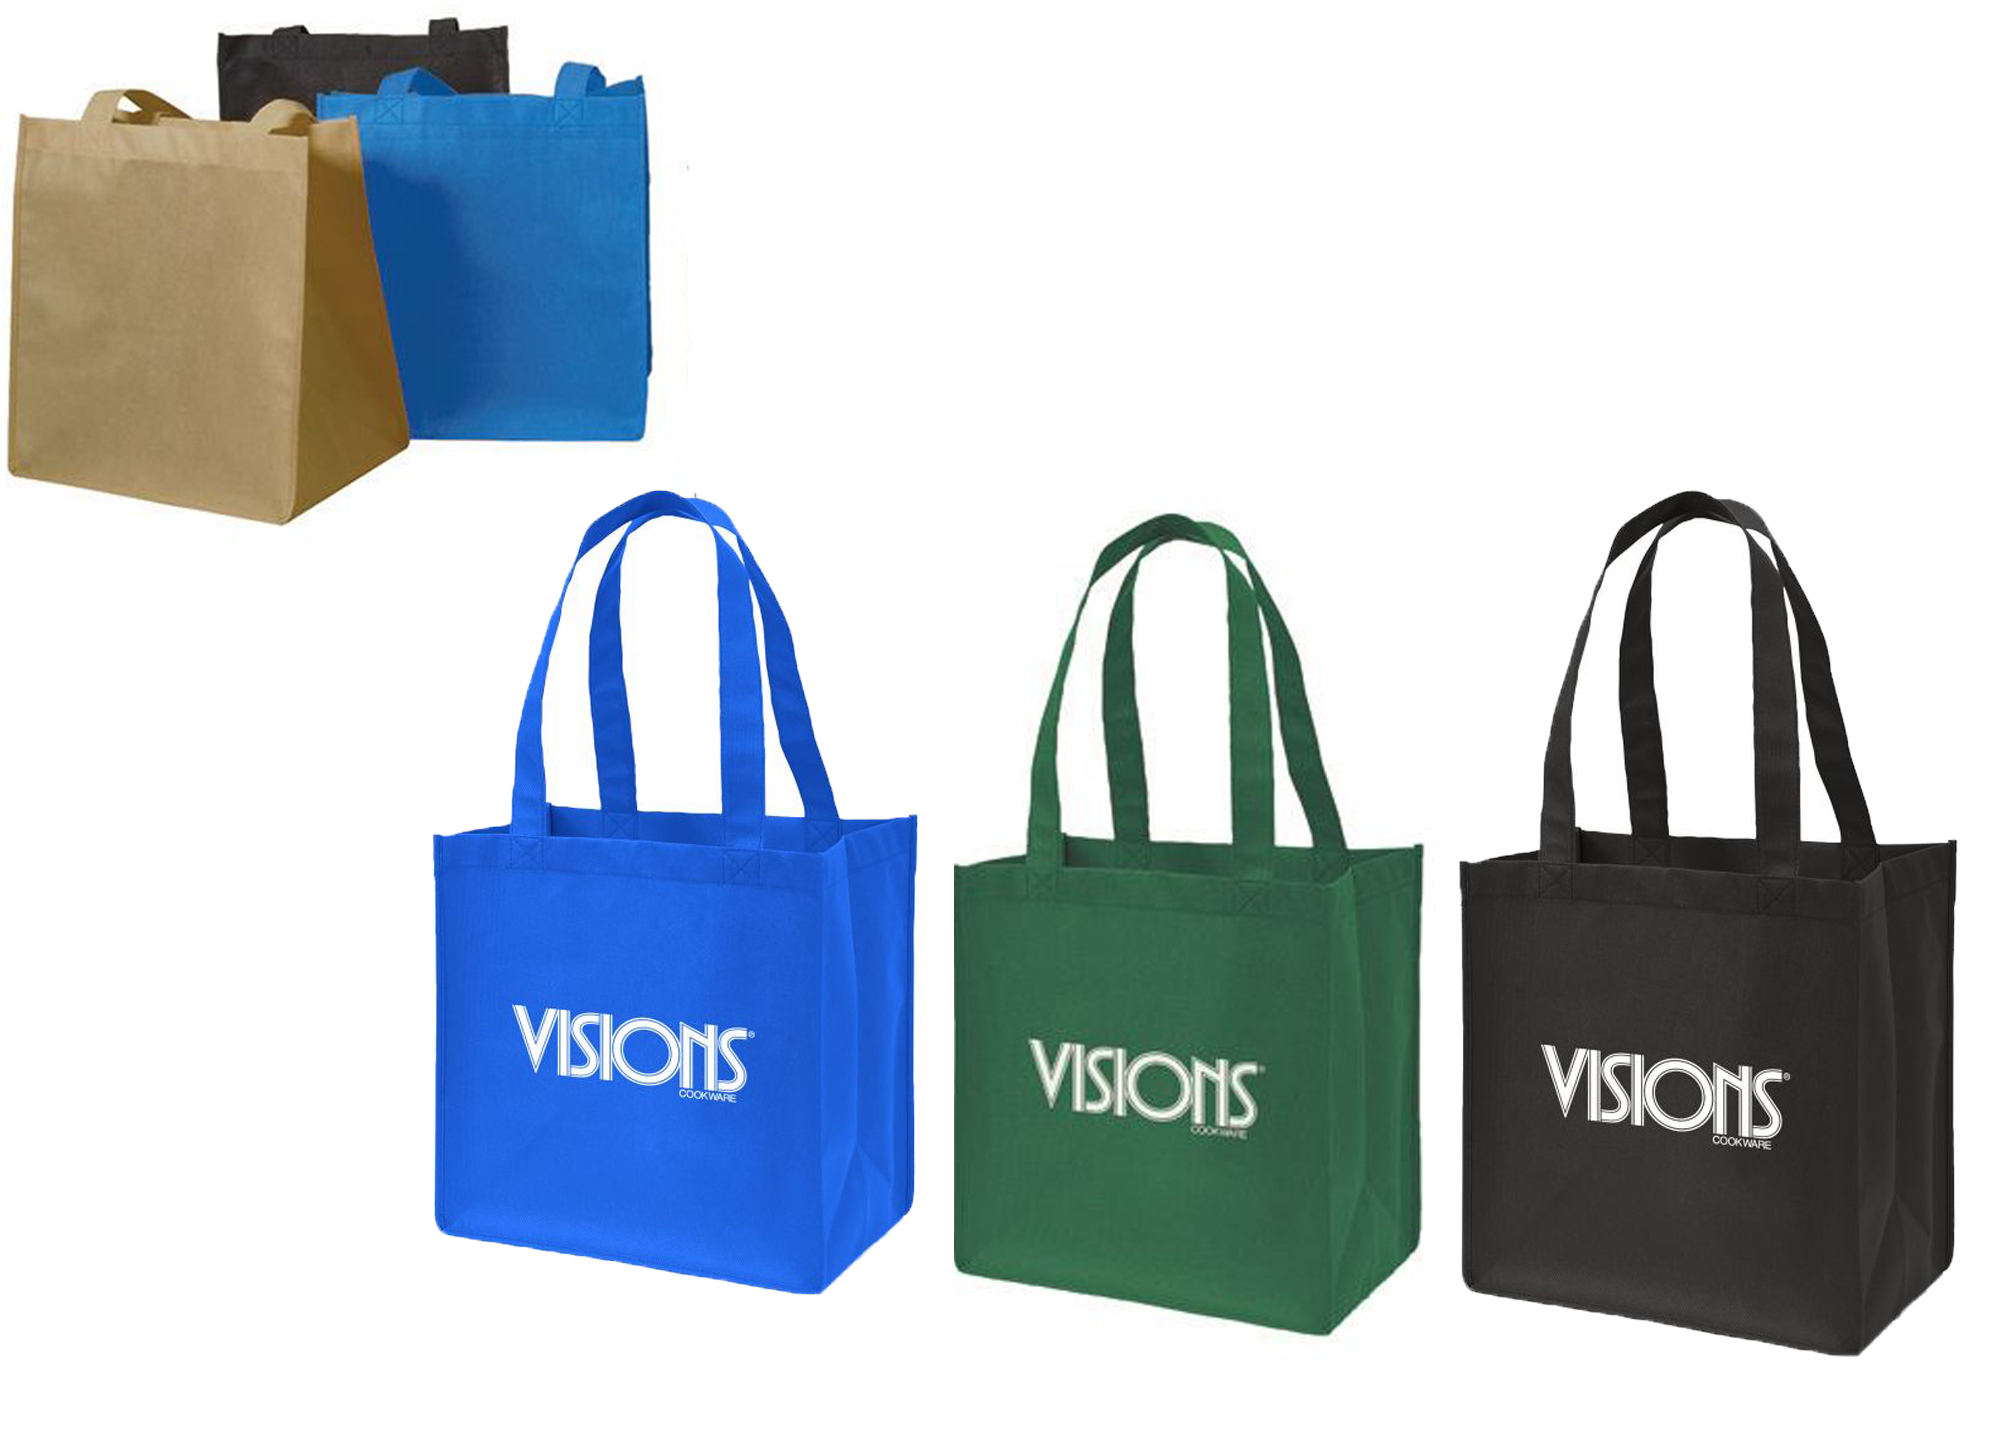 ''11'''' Non-Woven Tote Bags w/ Dual Carrying Handles - Choose Your Color(s)''